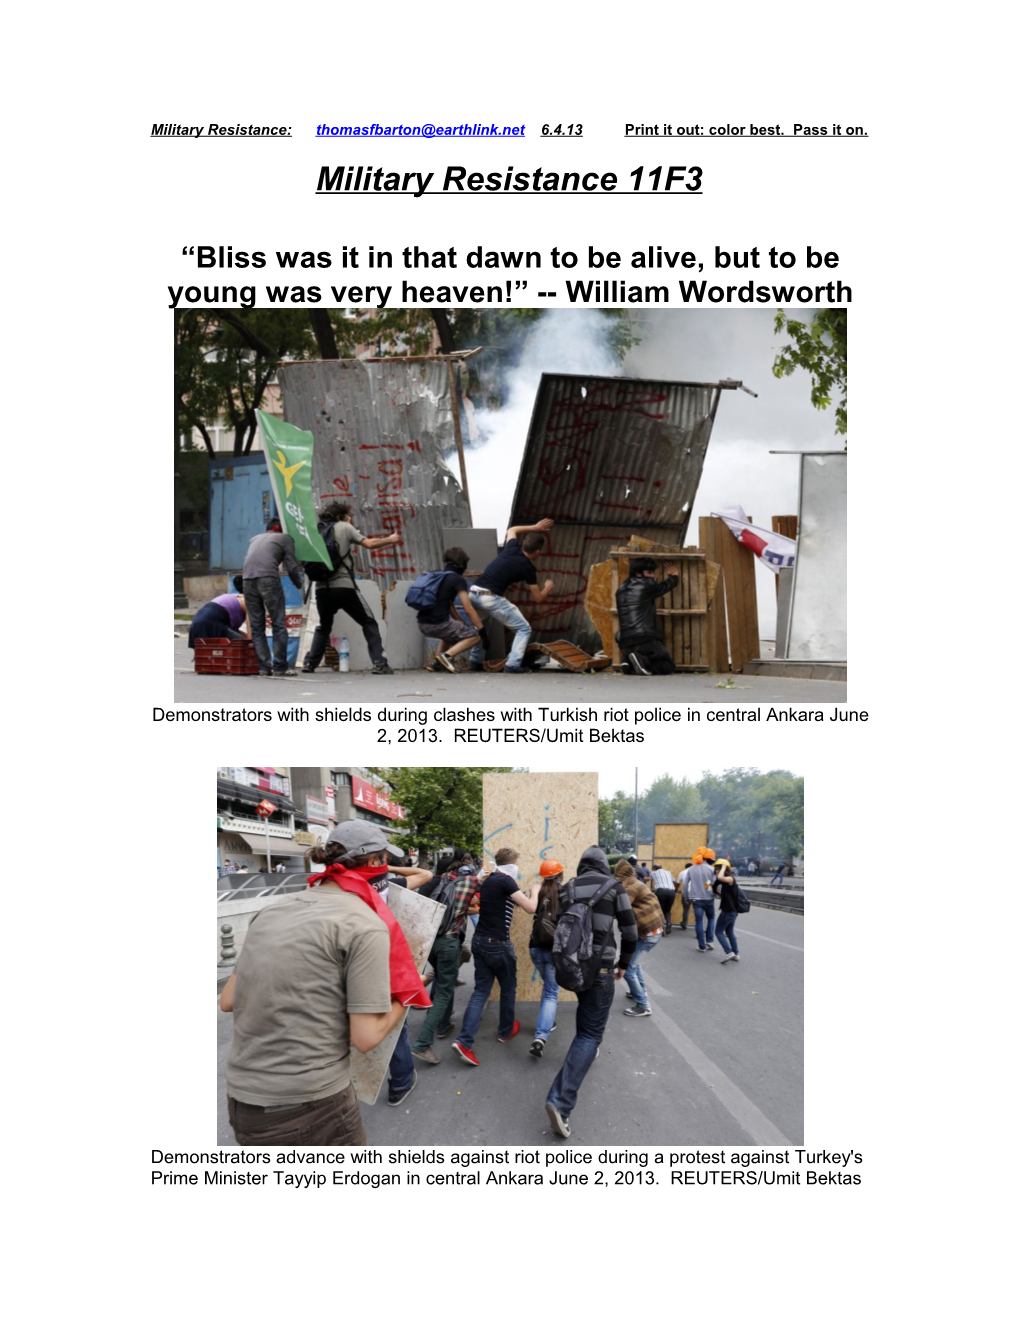 Military Resistance 11F3